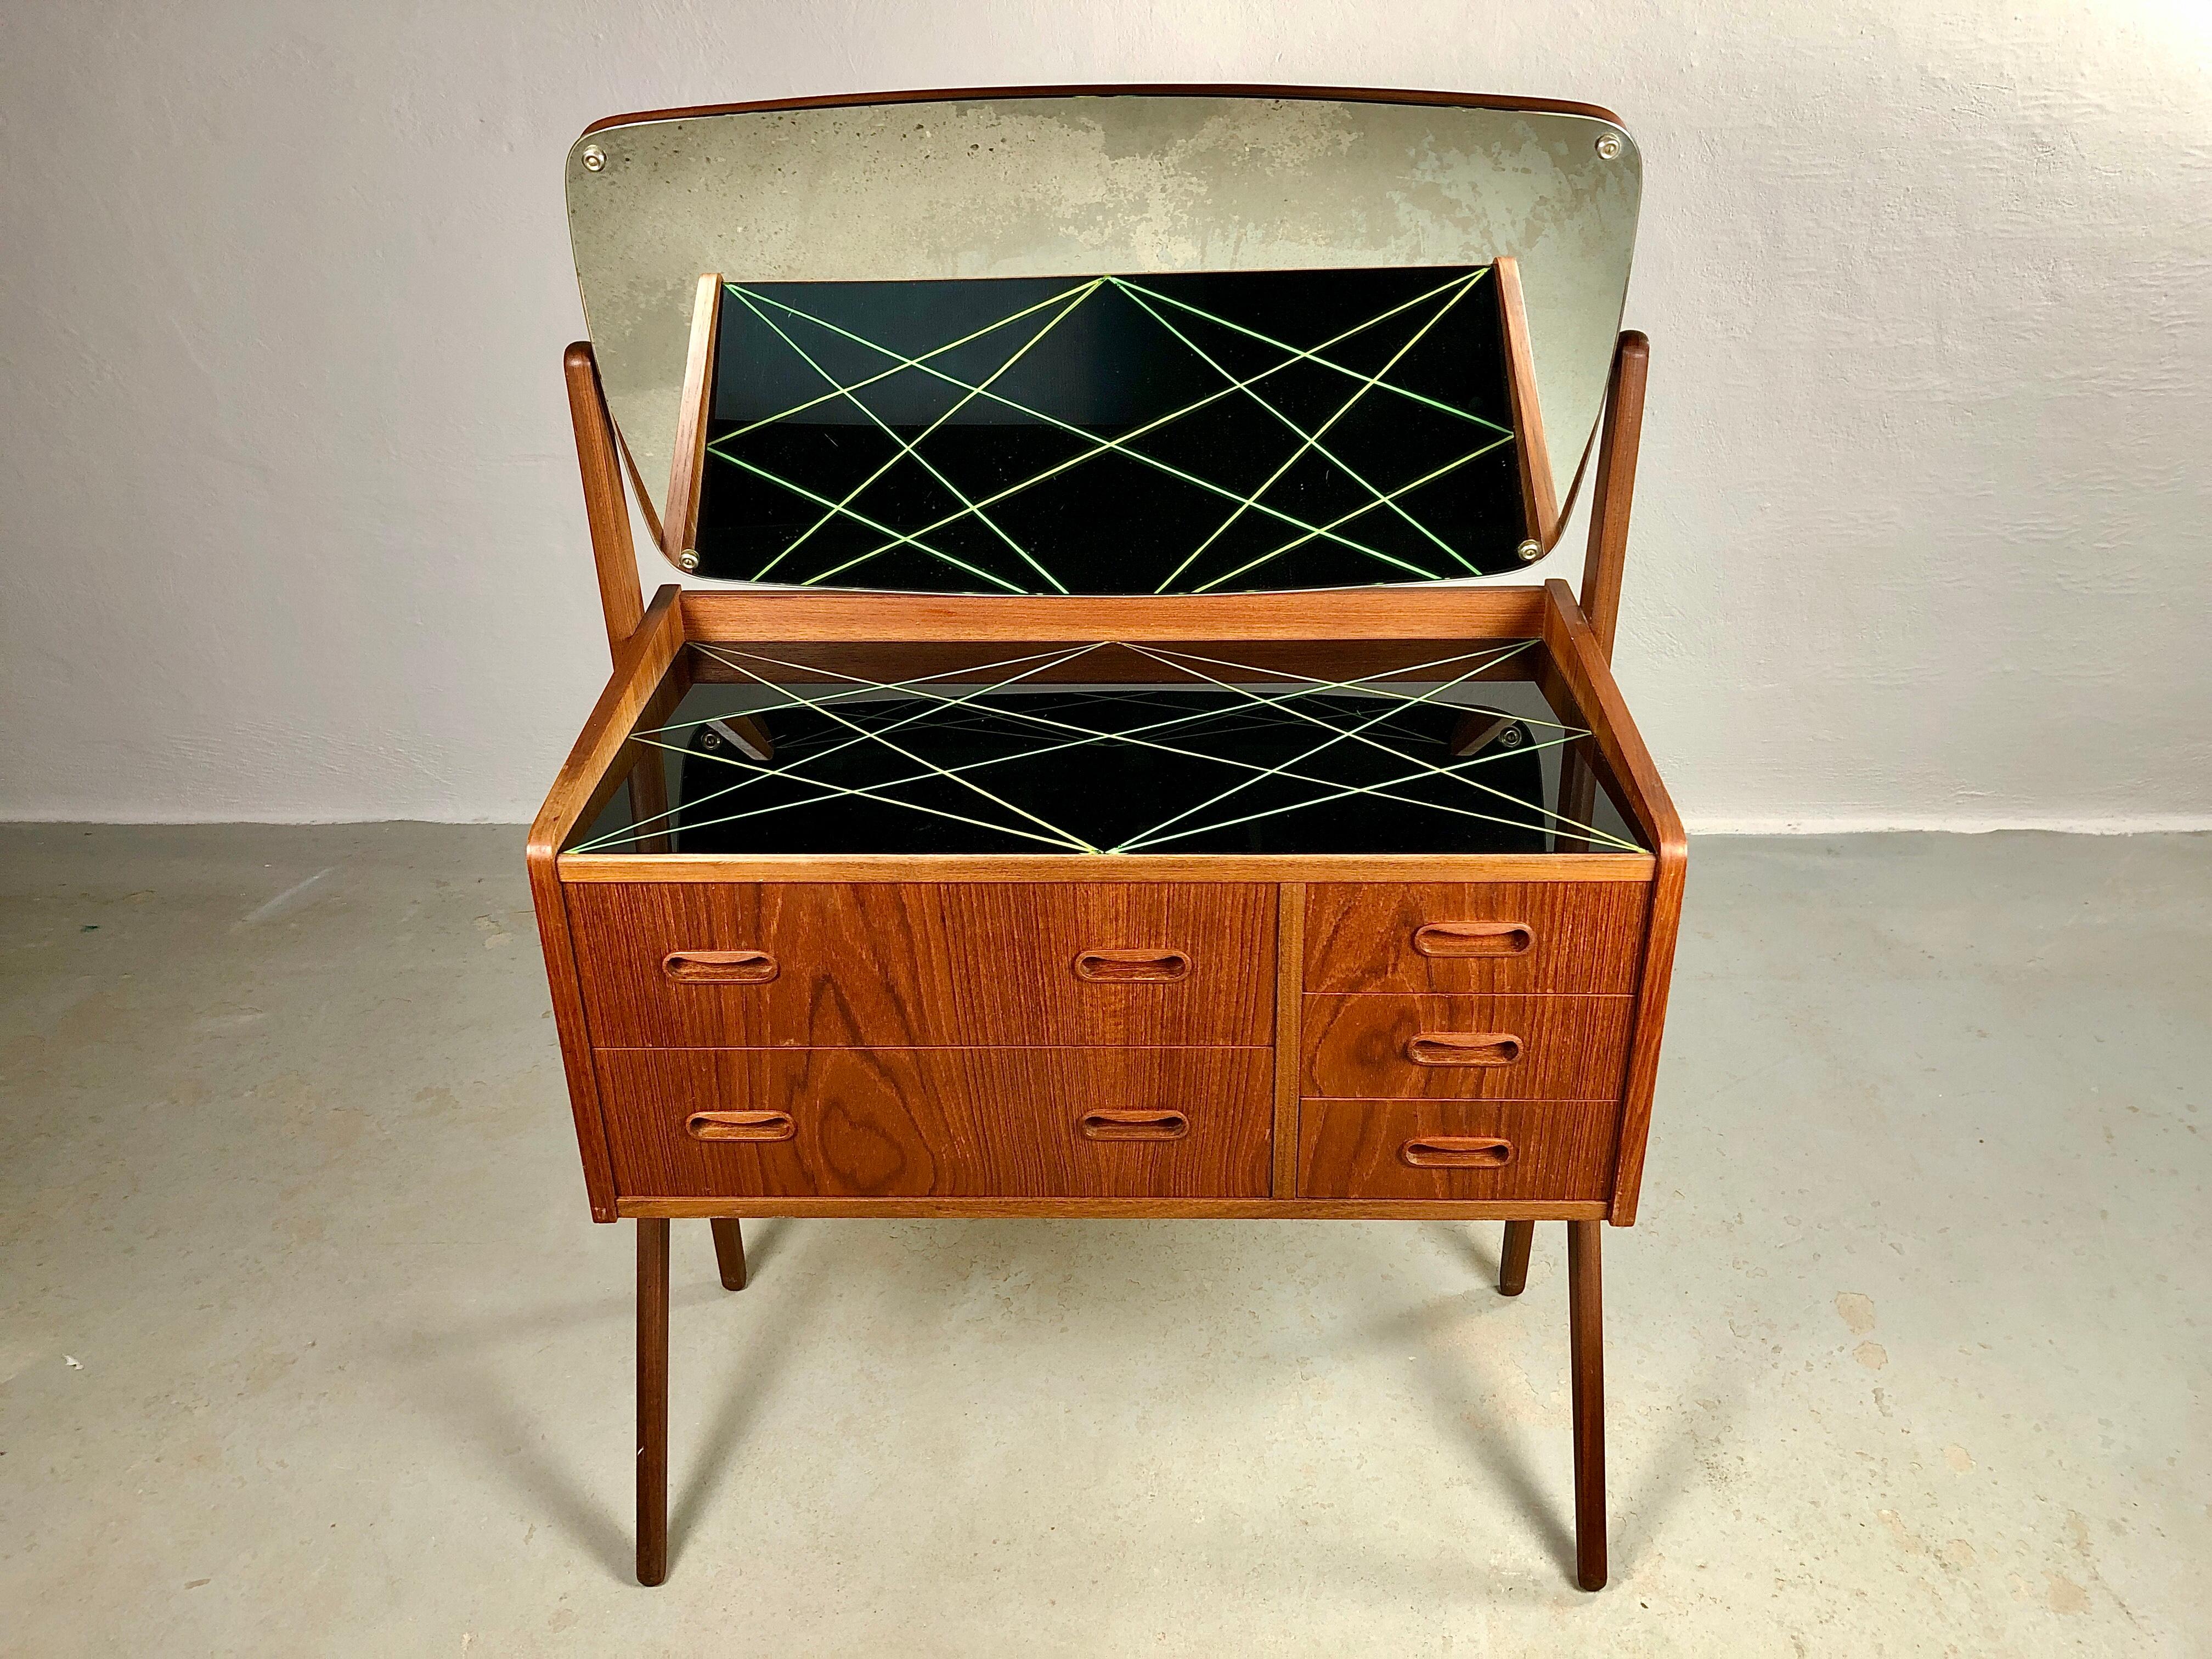 Danish teak dressing - vanity table from the 1960s.

The vanity table features a large adjustable mirror, an original black glass table top and 5 spacious drawers with room for what you need at the vanity table.

The table has been fully restored